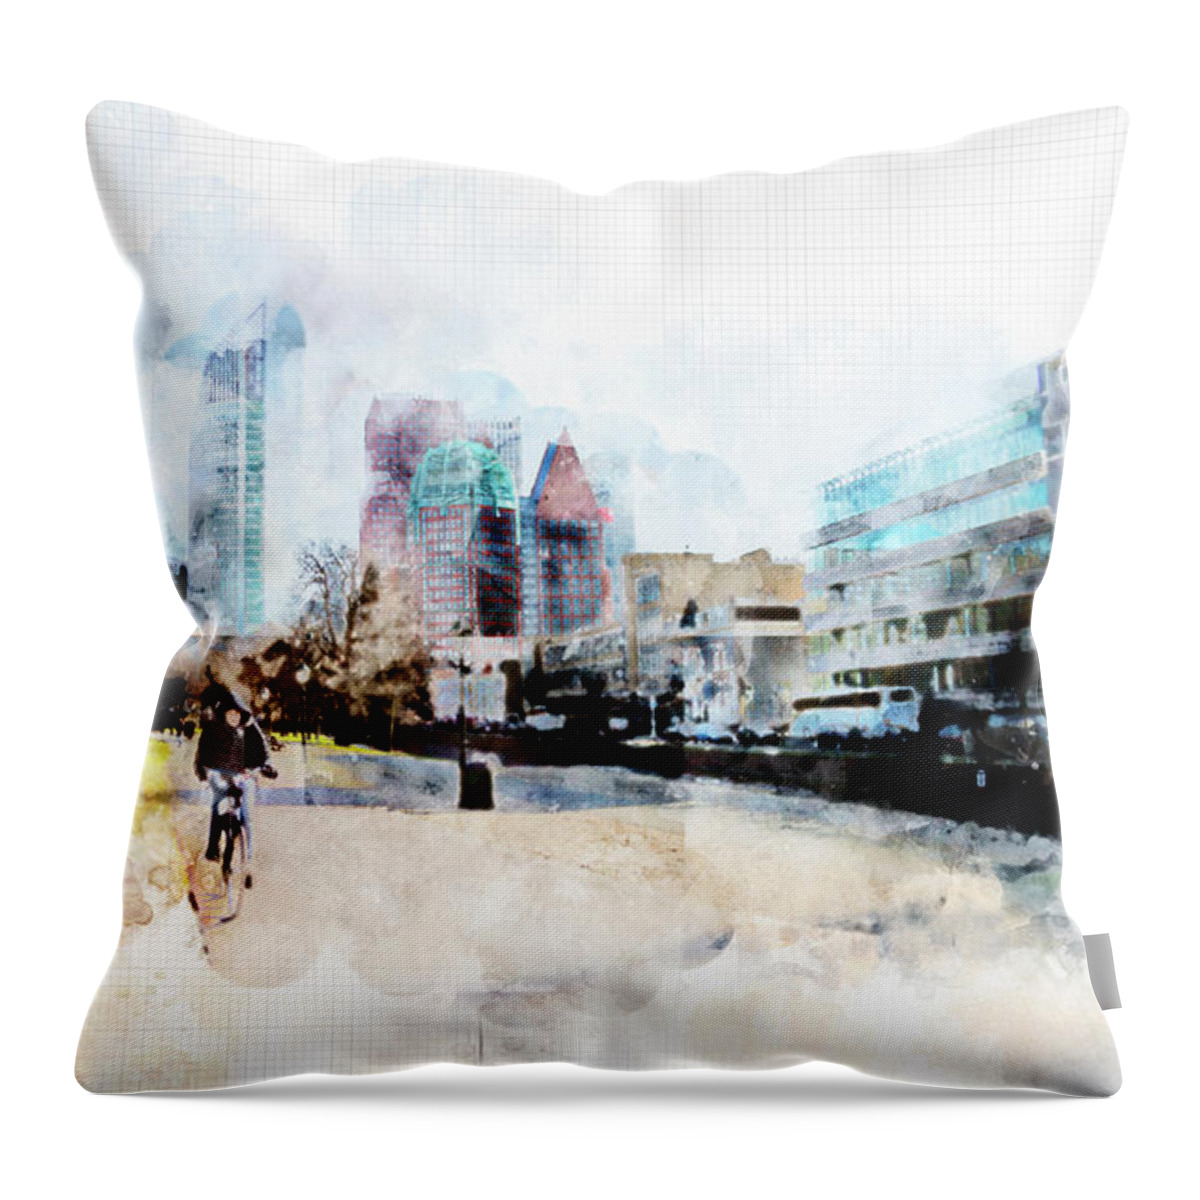 The Hague Throw Pillow featuring the digital art City Life In Watercolor Style #6 by Ariadna De Raadt